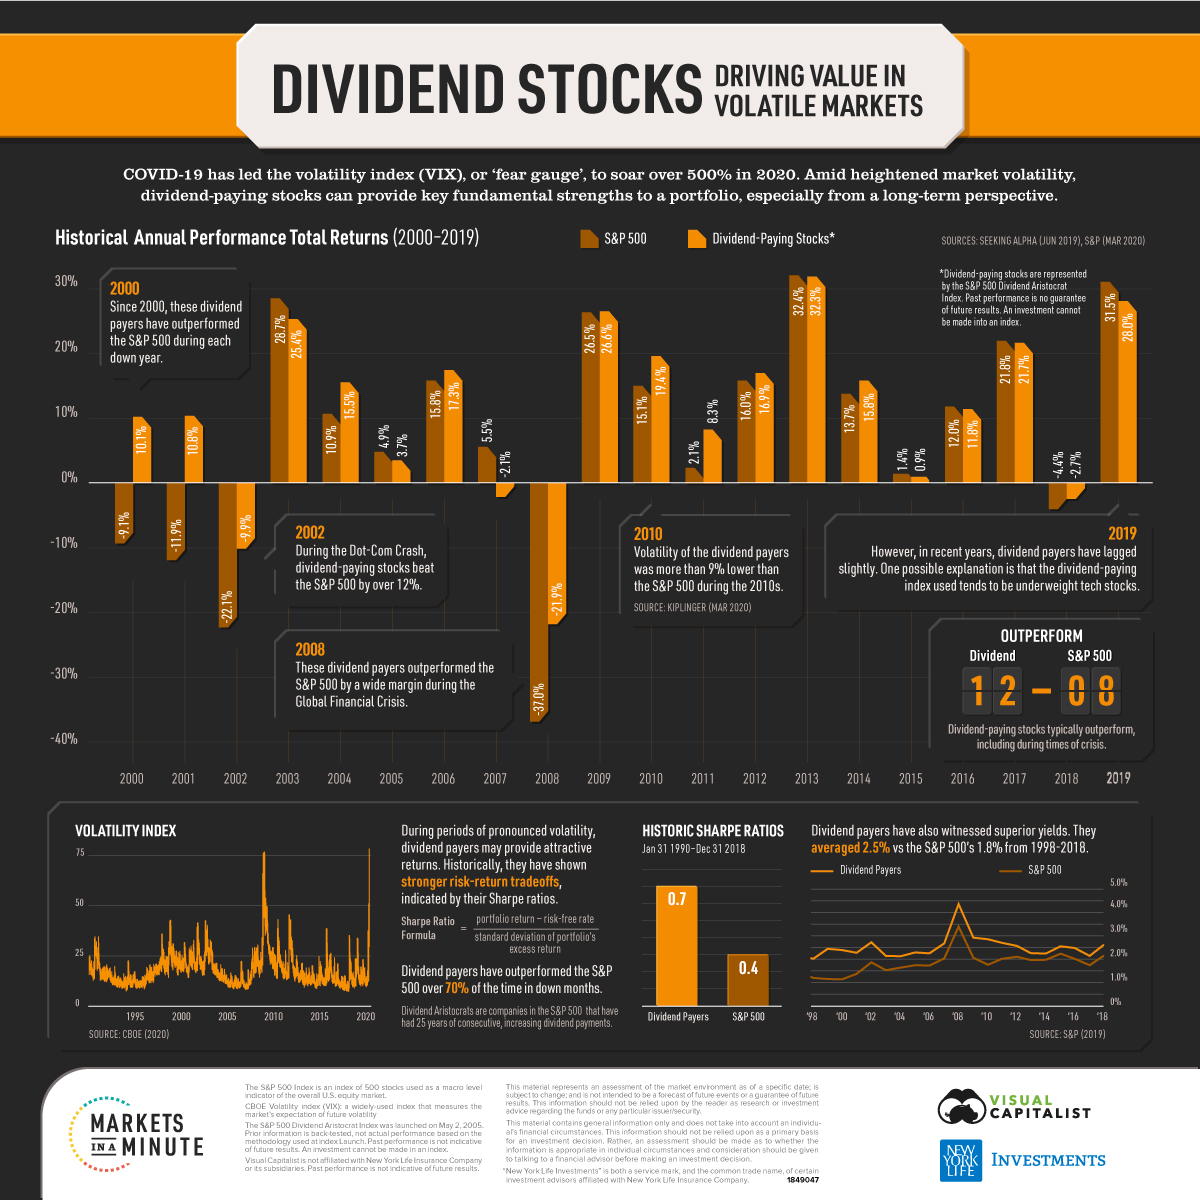 Dividend Stocks: Driving Value in Volatile Markets